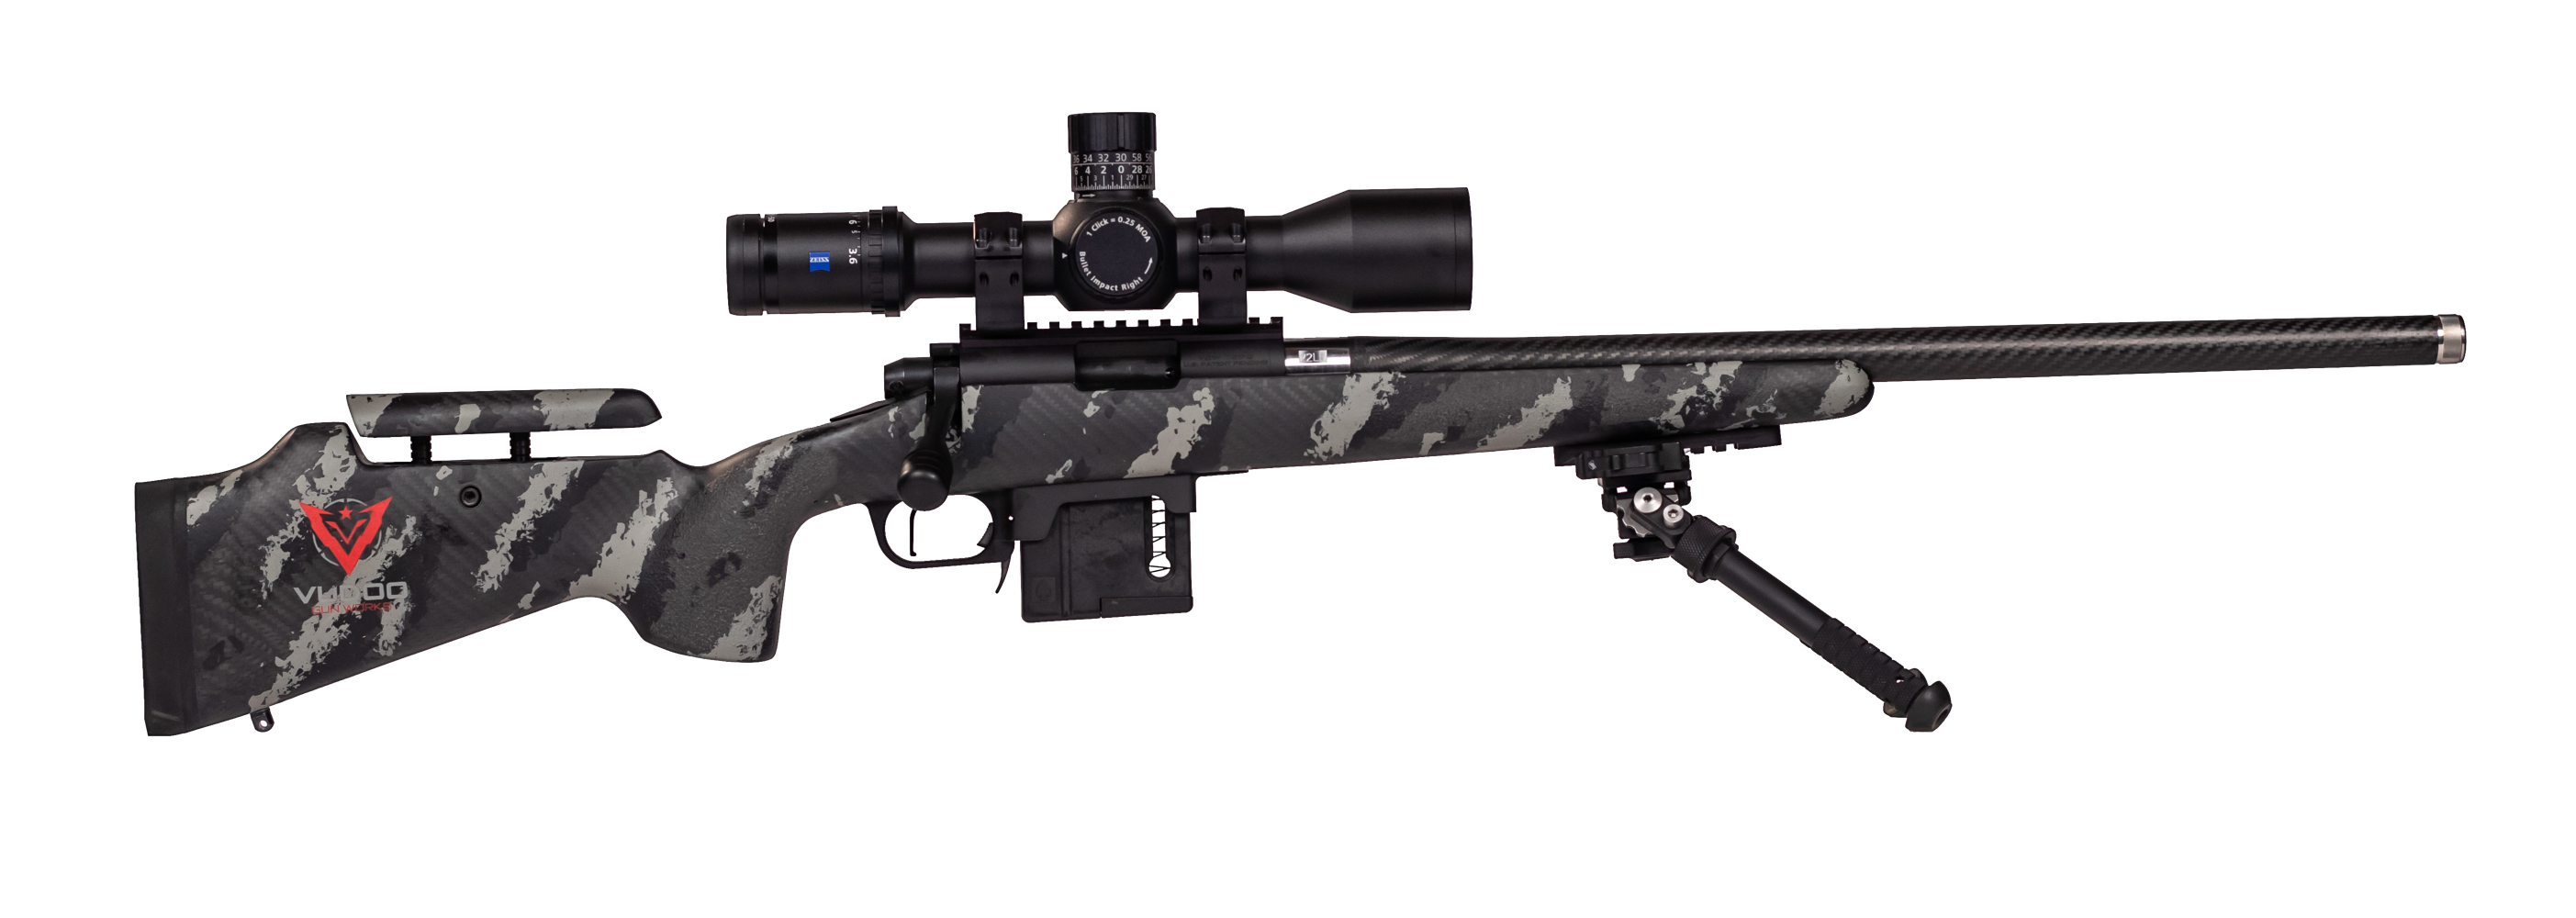 The New Carbon Sinister 22LR Rimfire Rifle from Vudoo Gun Works